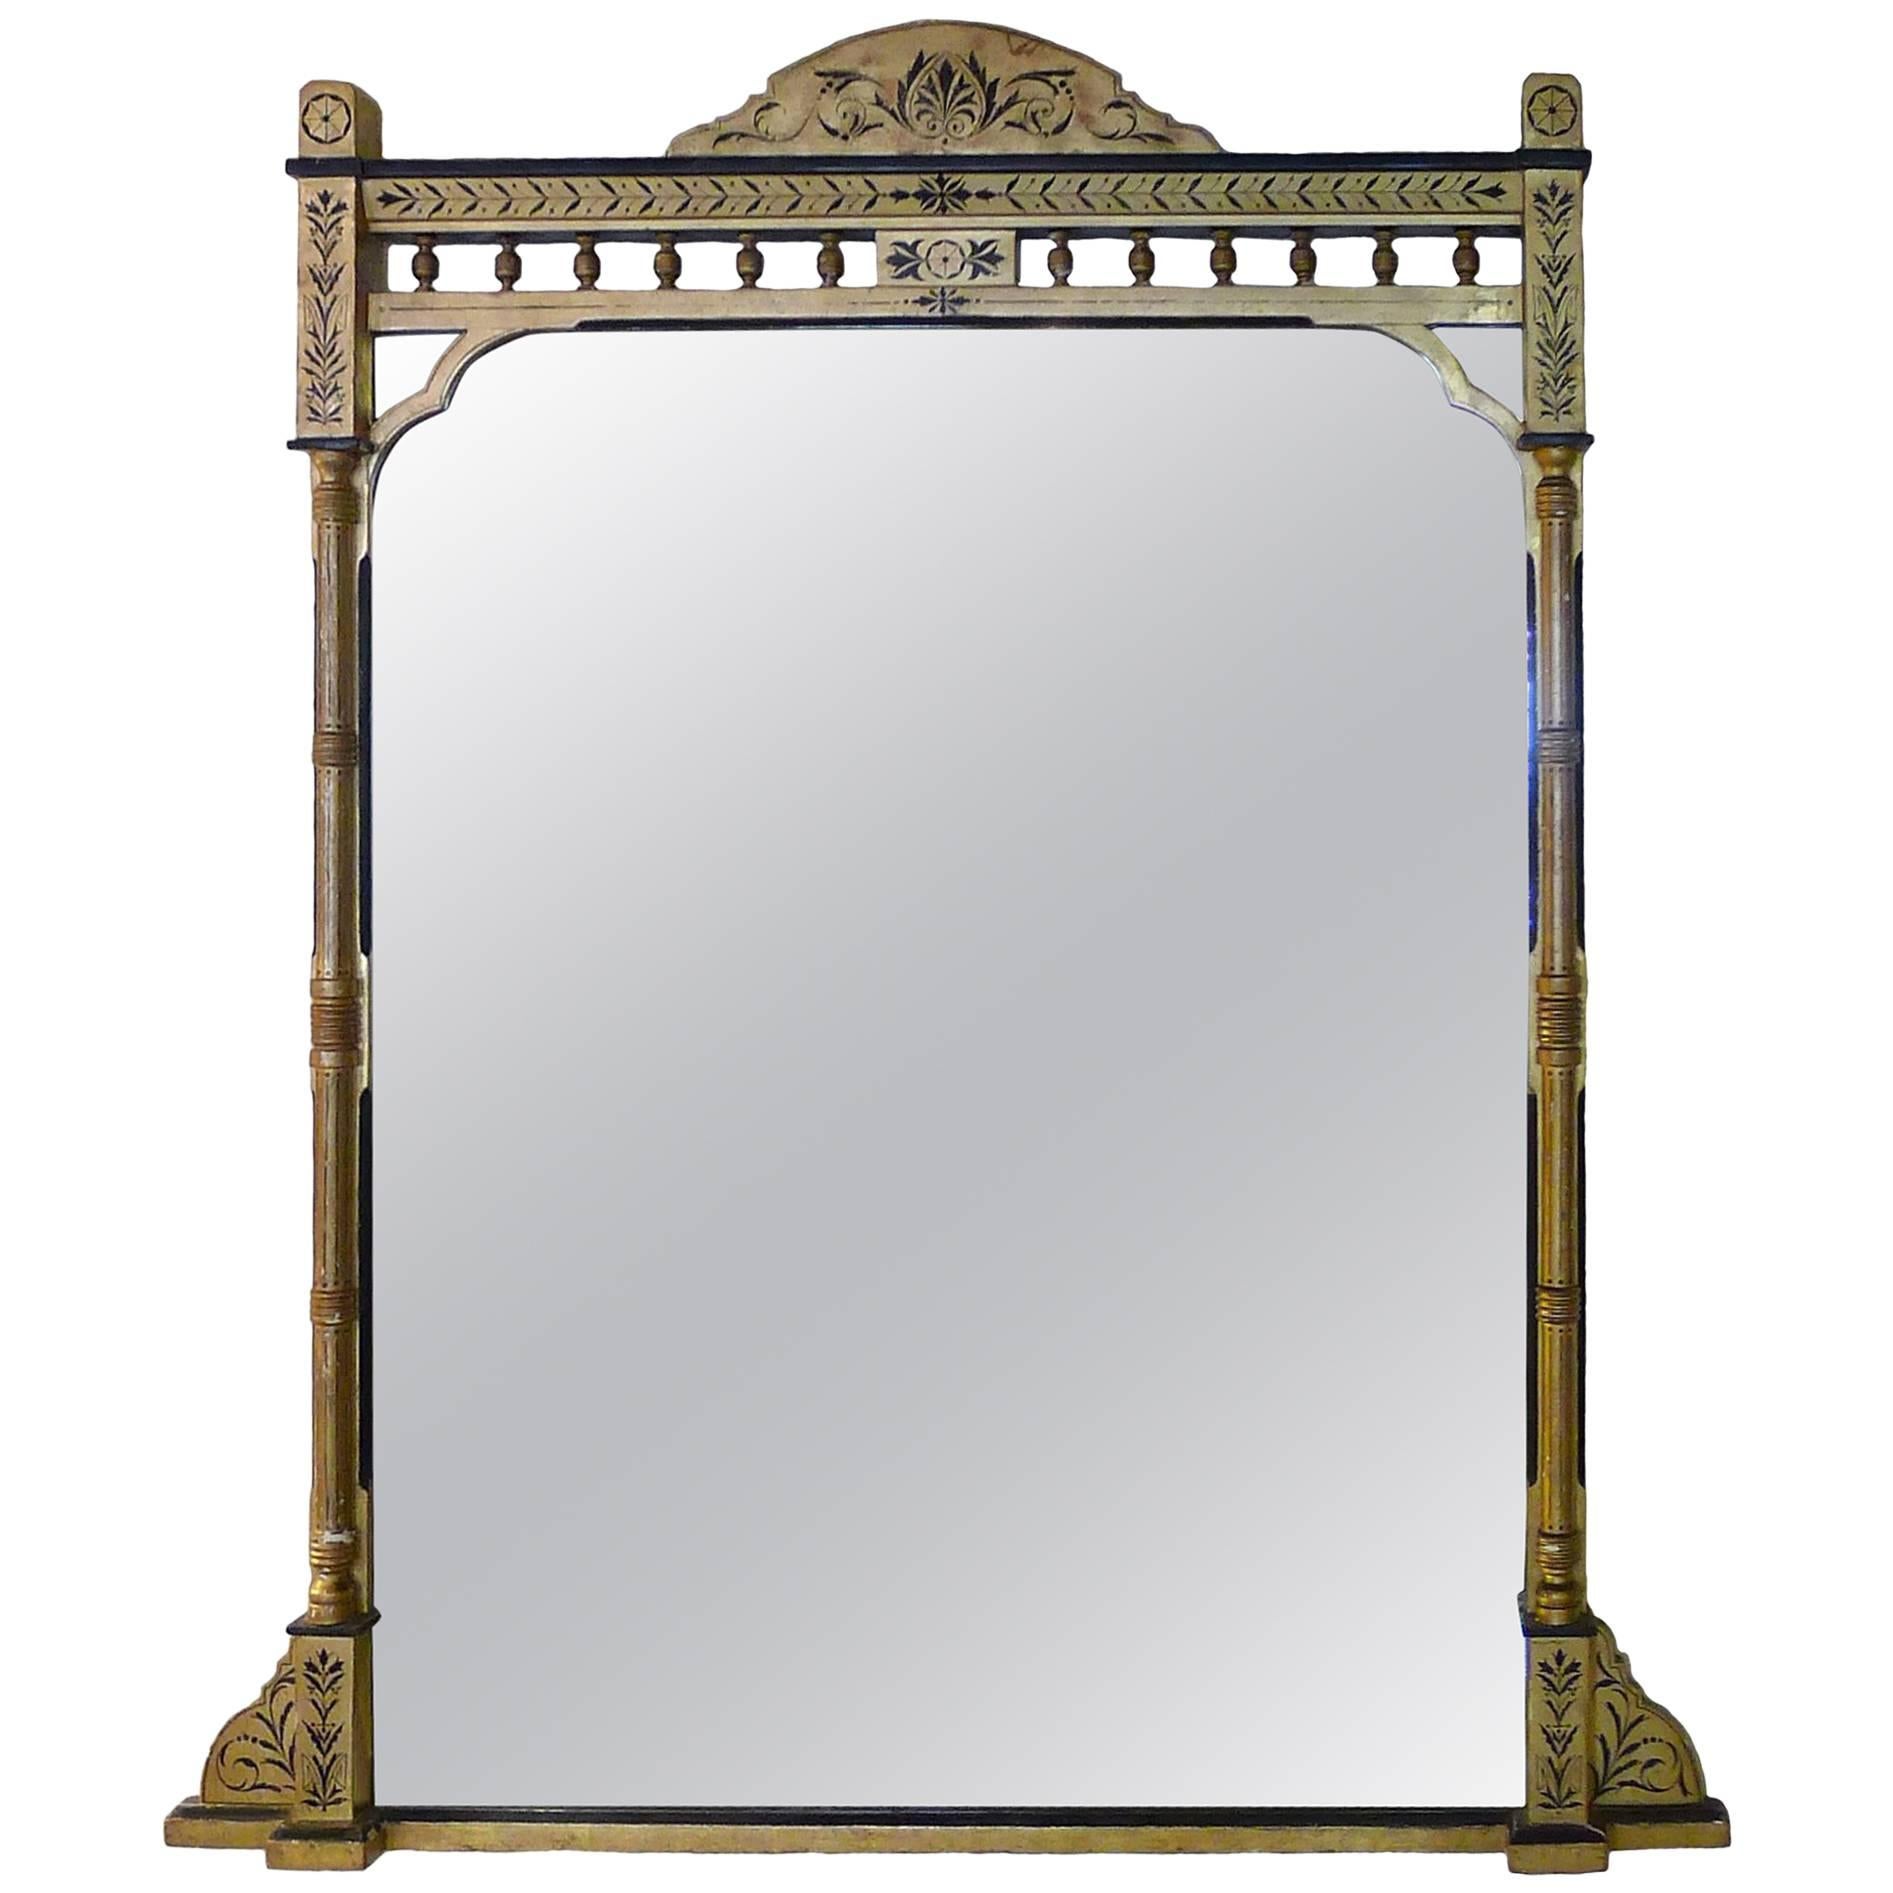 1860s American Giltwood Overmantel Tall Mirror